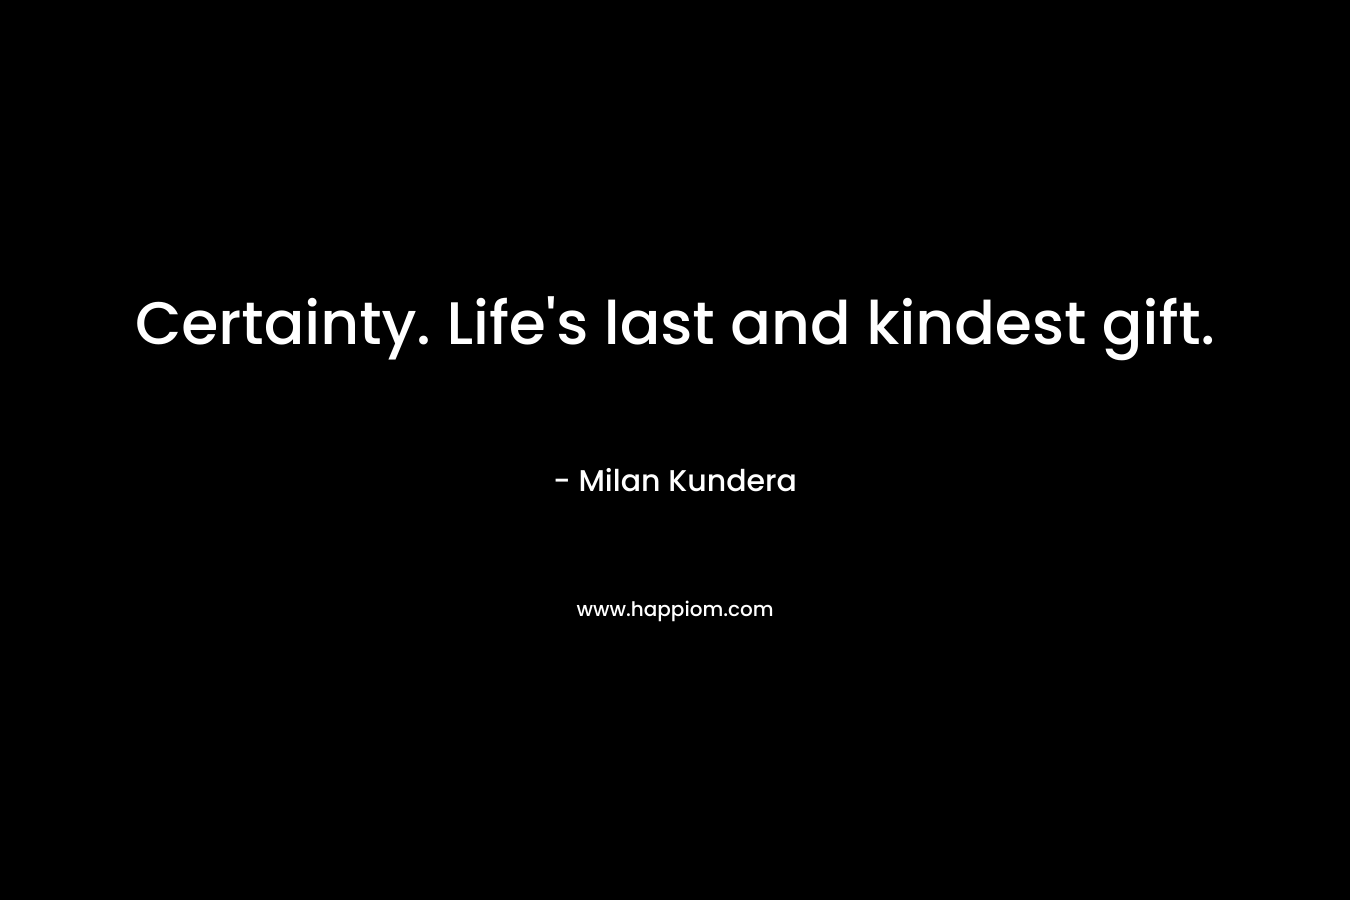 Certainty. Life’s last and kindest gift. – Milan Kundera